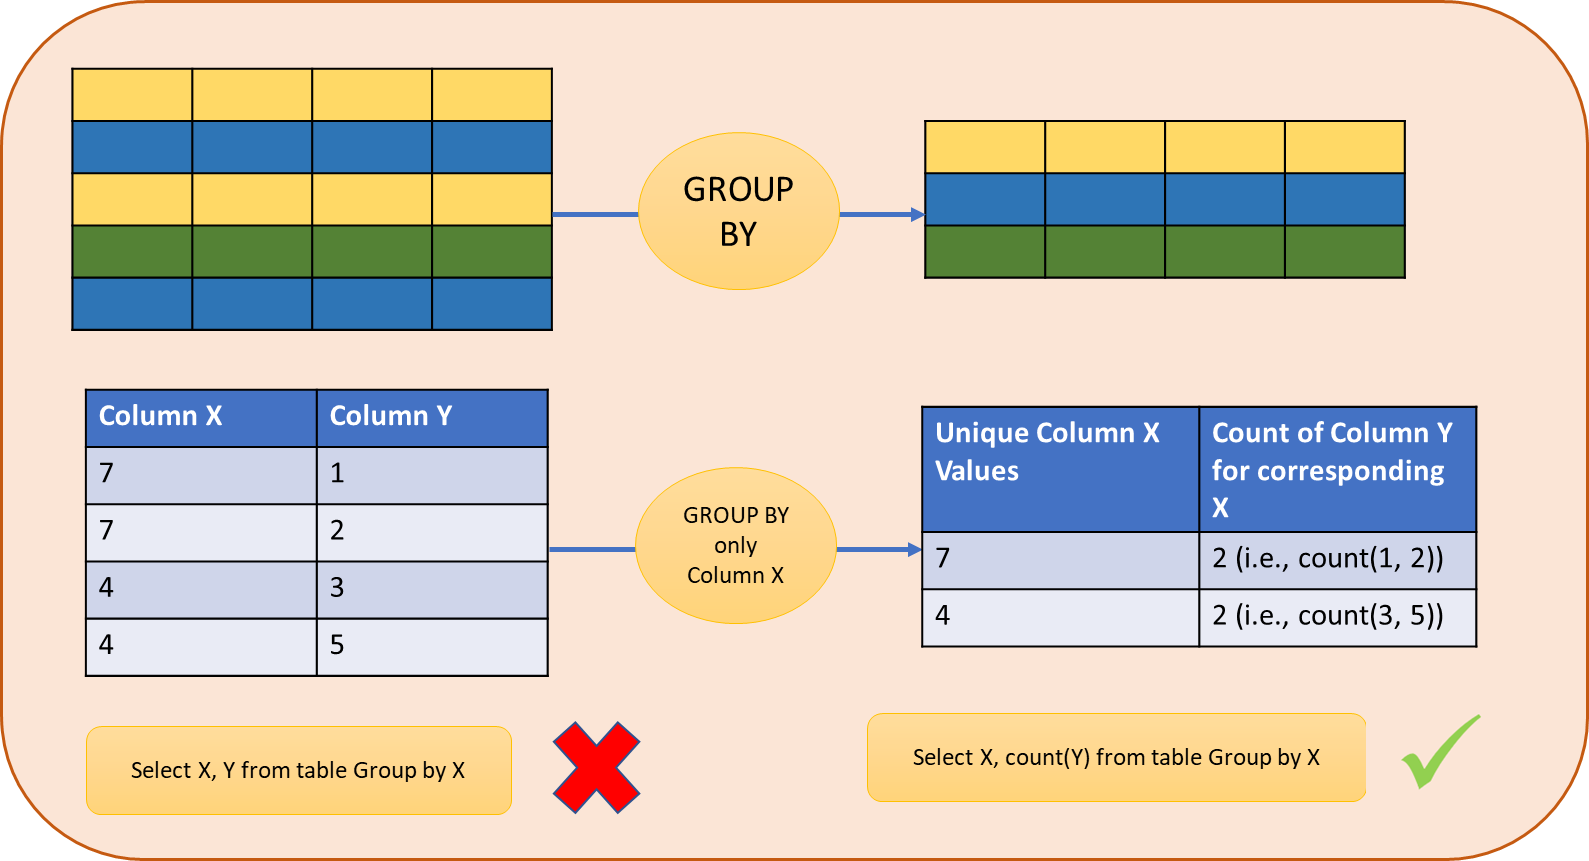 Image about how "group by" statement works